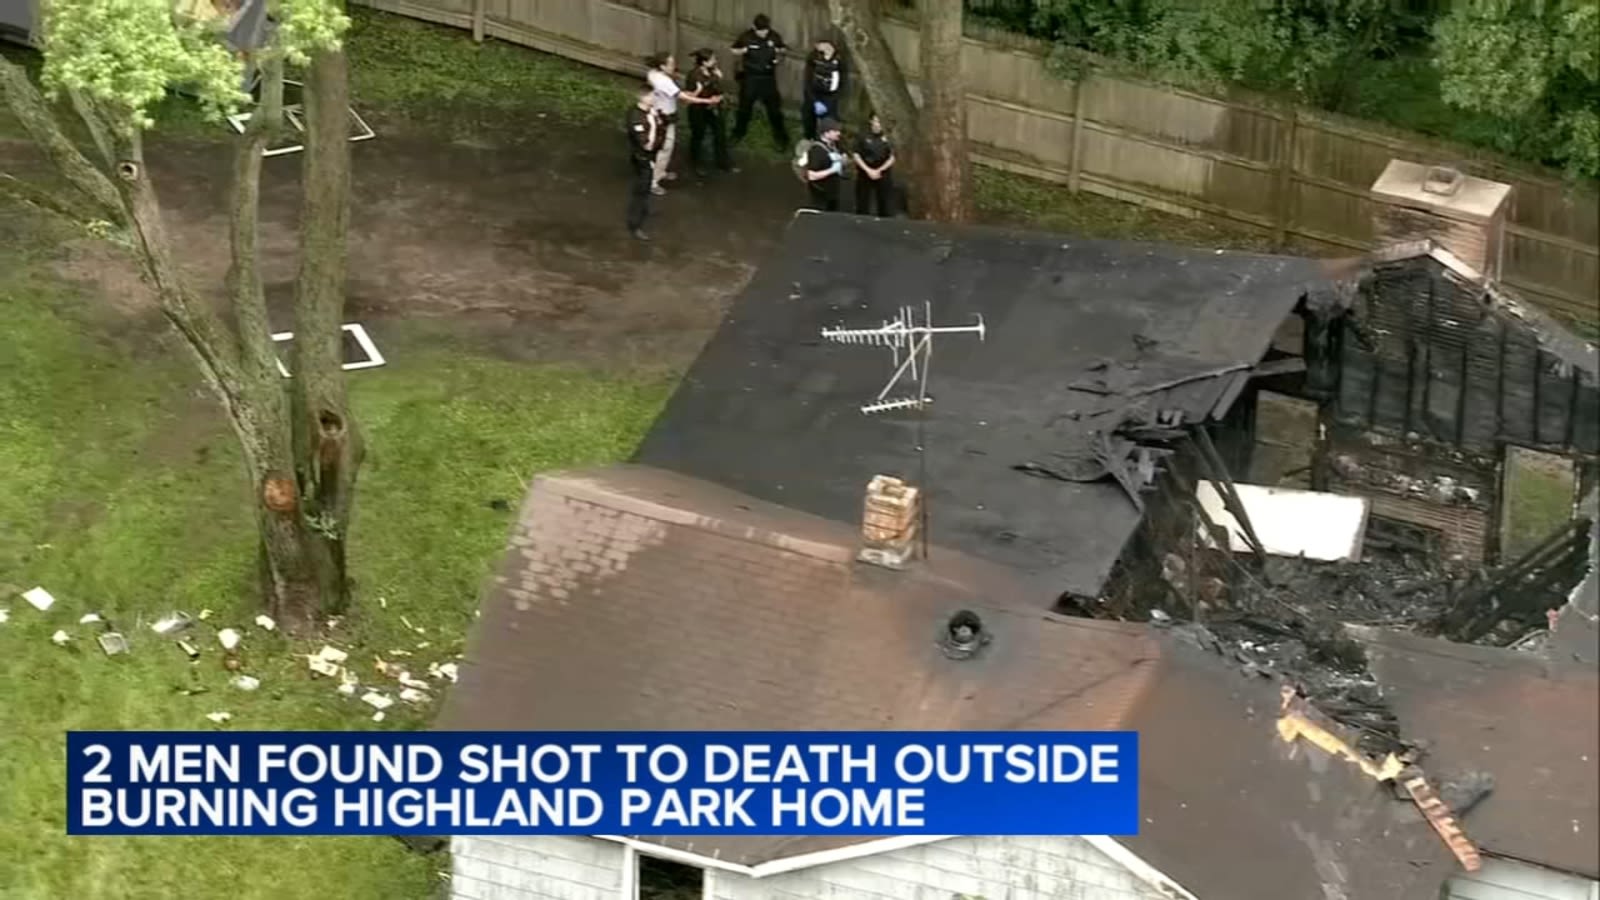 Highland Park shooting: Man in custody after 2 brothers found fatally shot outside burning home